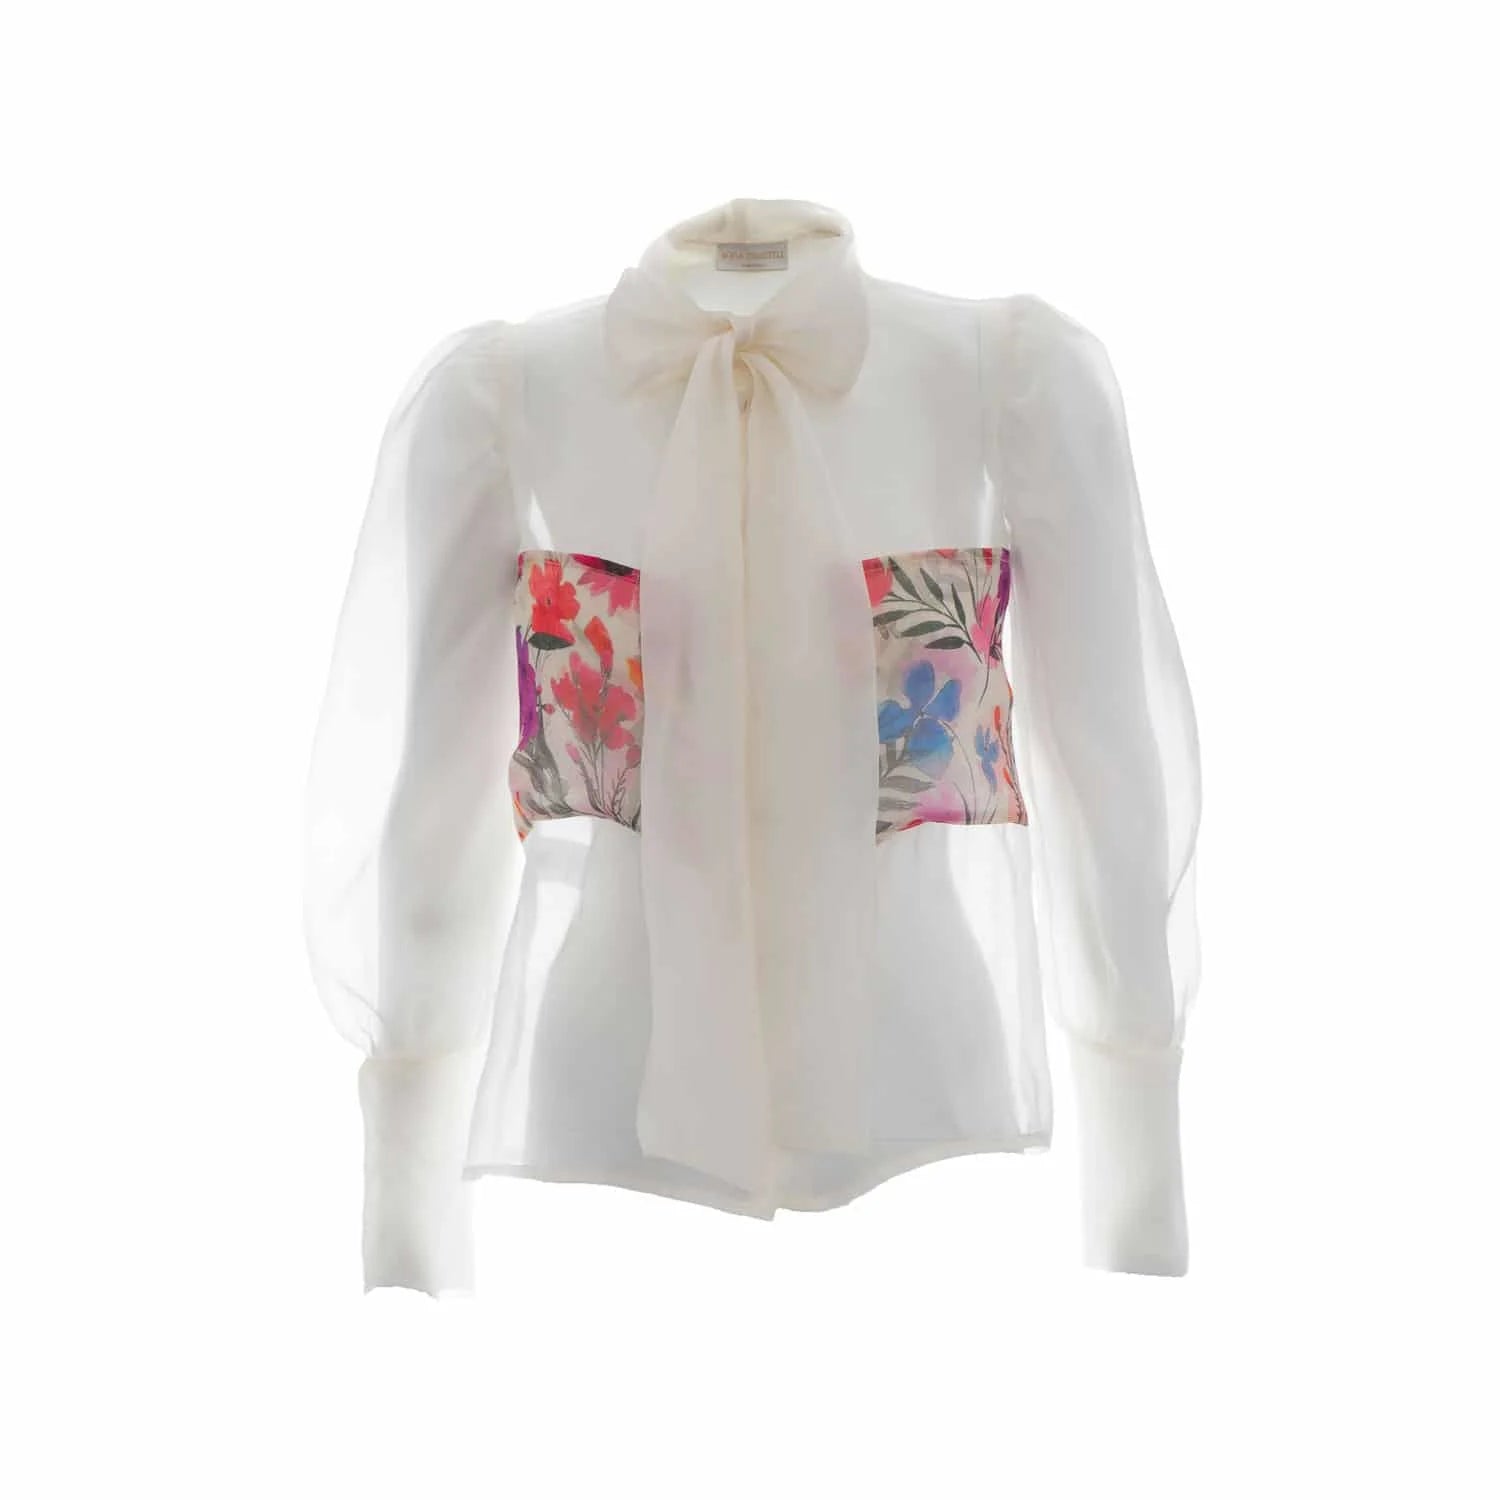 Organza blouse with floral pattern - Blouse